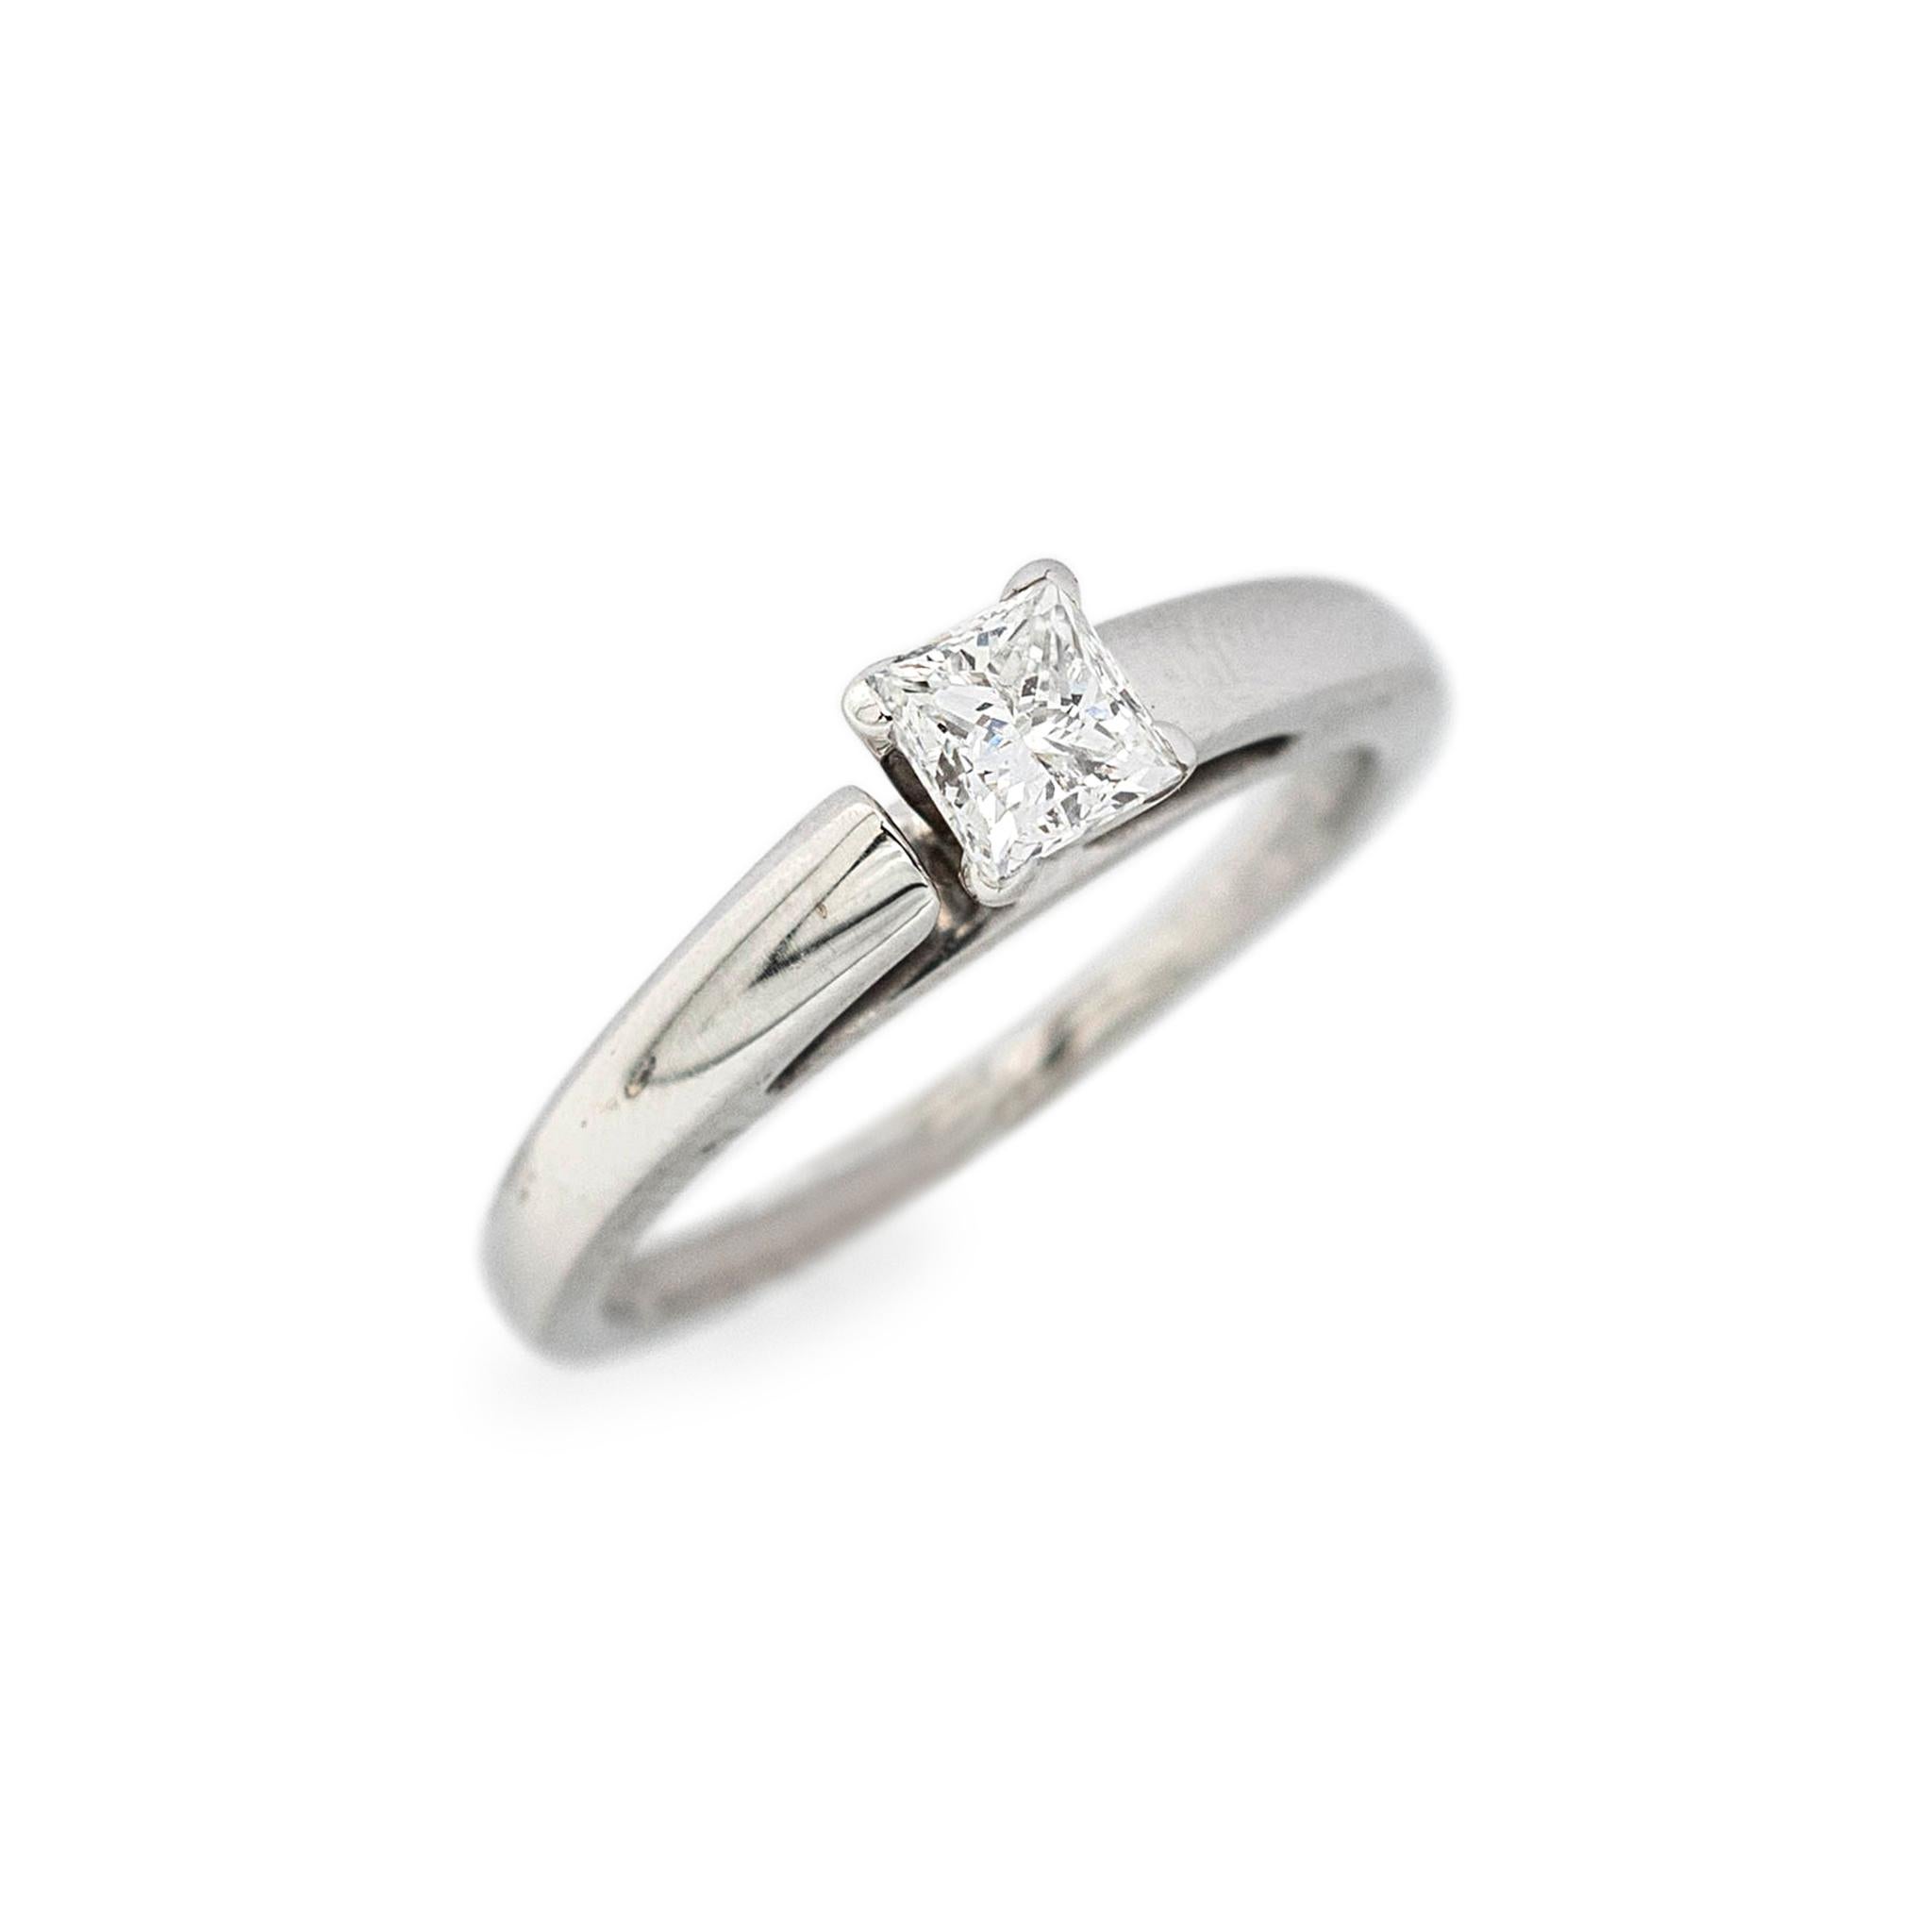 Gender: Ladies

Material: 14K White Gold

Size: 7.75

Shank Width: 3.10mm

Weight: 4.40 grams

Ladies 14K white gold, diamond solitaire engagement ring with a half round shank.
Engraved with 